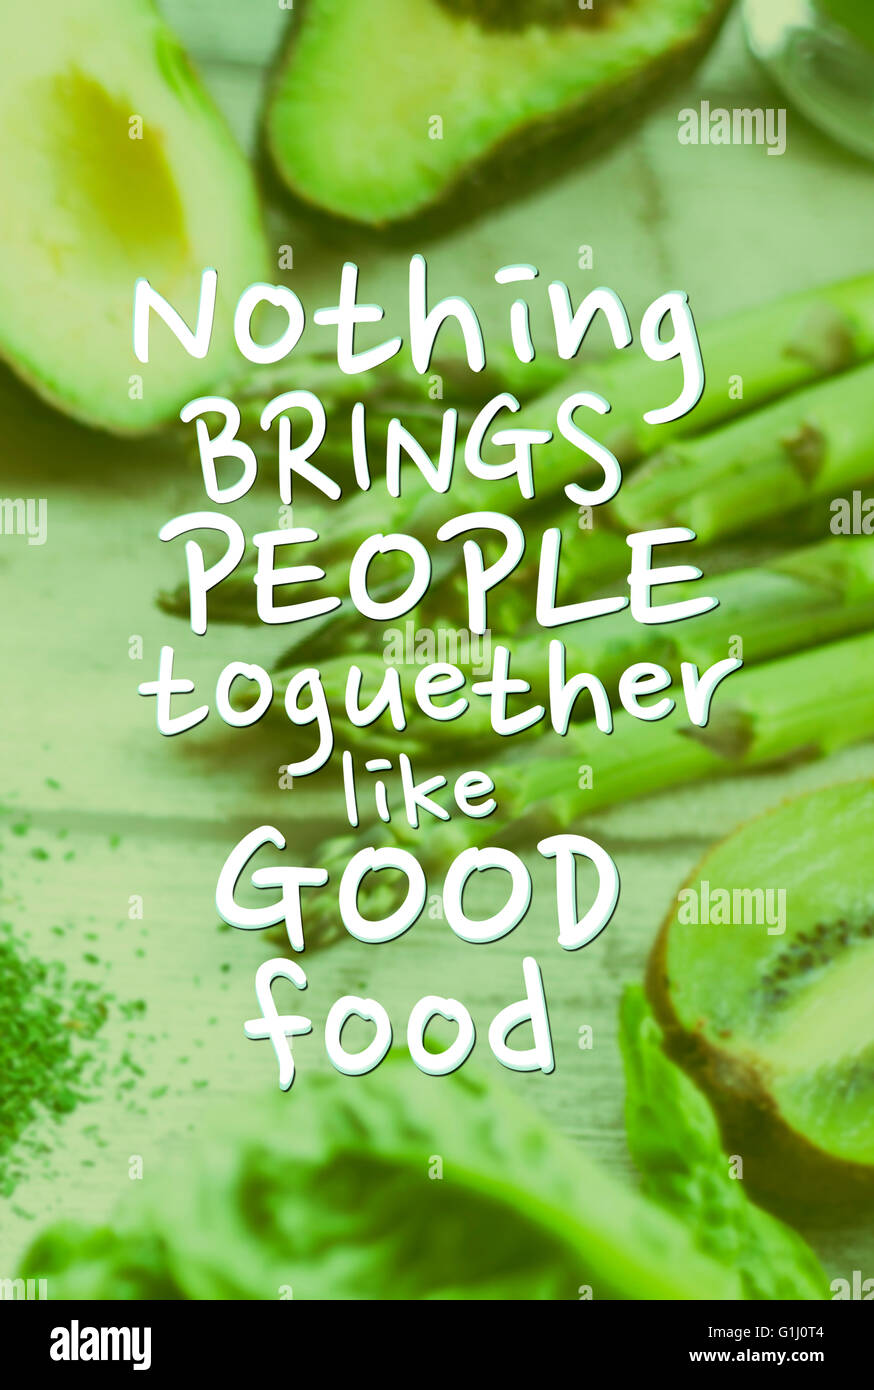 Fresh Green Vegetables And Food Quote Stock Photo Alamy